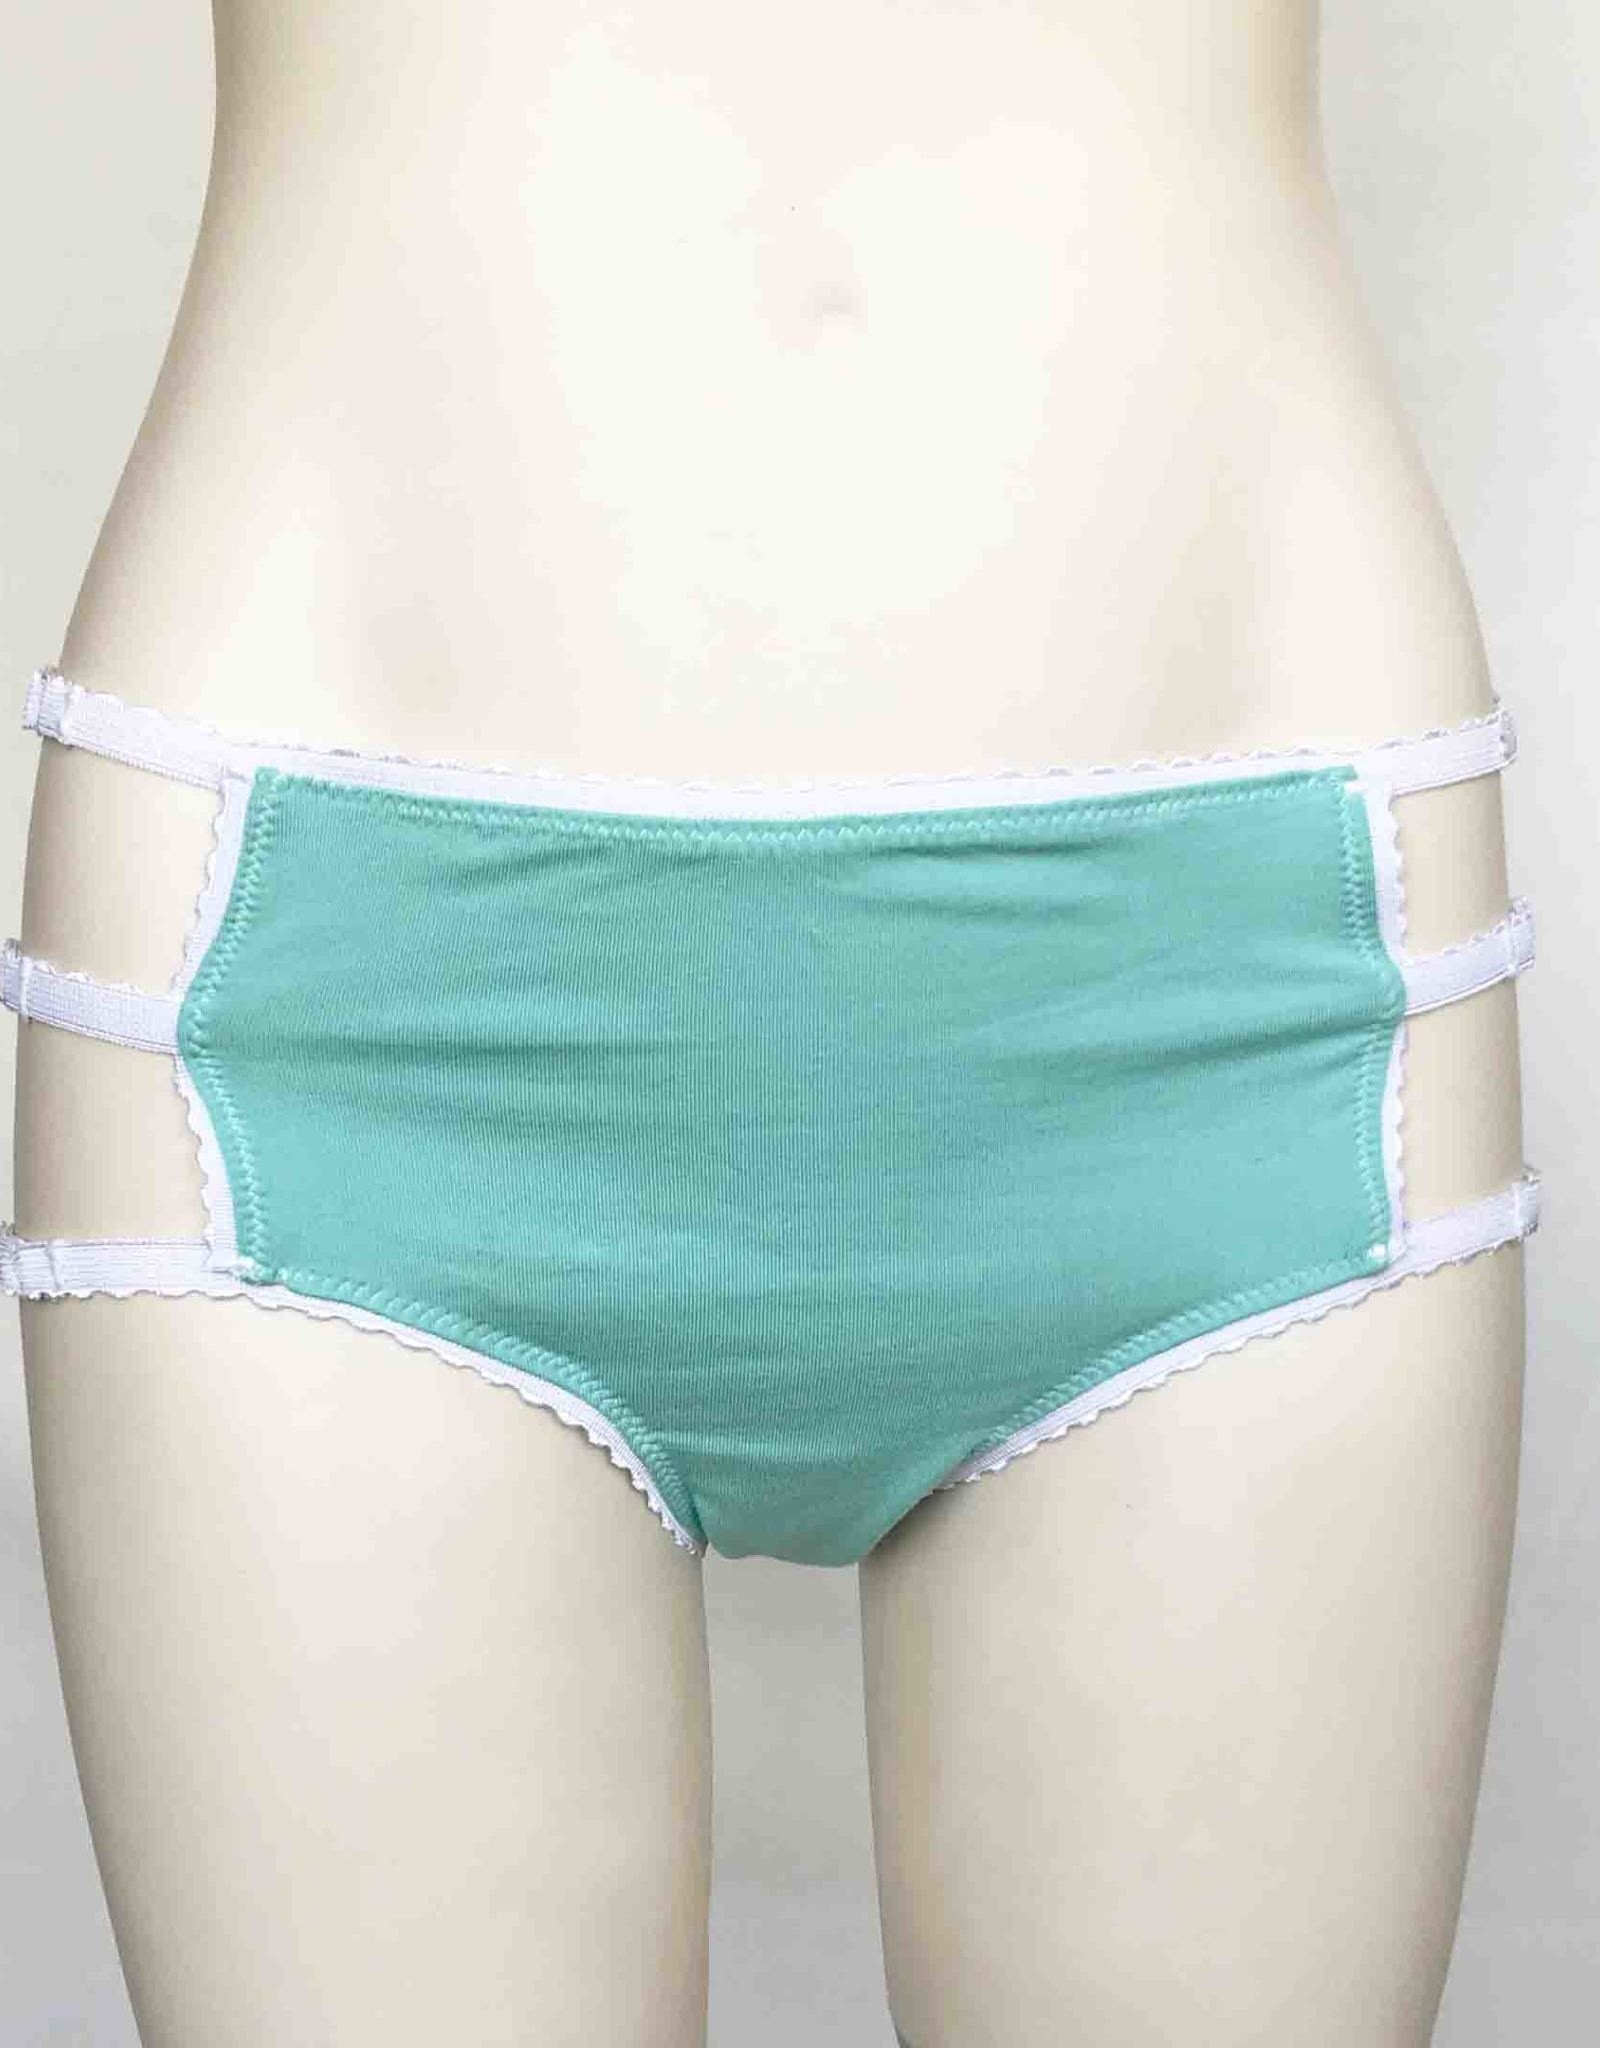 Devil May Wear Cage Panties. Bamboo blend. Adjustable size tabs. Mid Rise. Seafoam/White